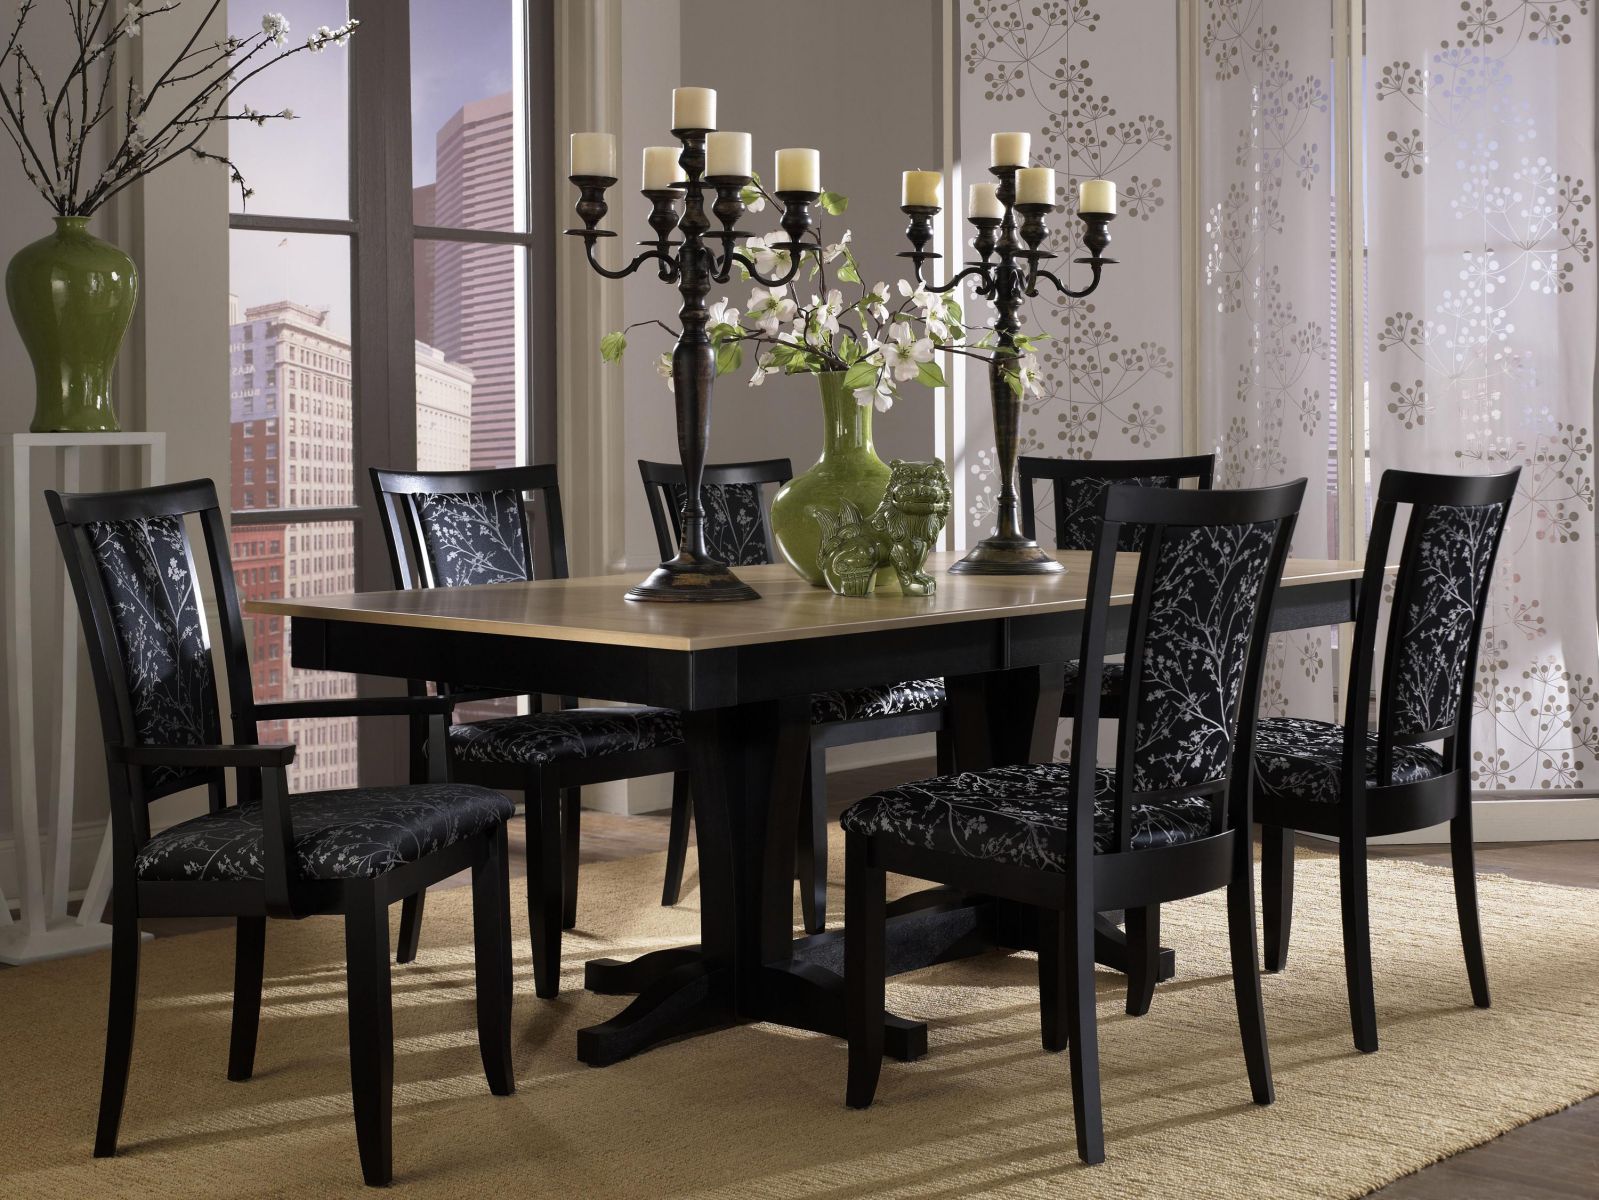 Contemporary Dining With Breathtaking Contemporary Dining Room Sets With Black Chairs On Rug Coupled With Table And Furnished By Candle Holders Completed With Green Vase Flowers Dining Room The Design Contemporary Dining Room Sets